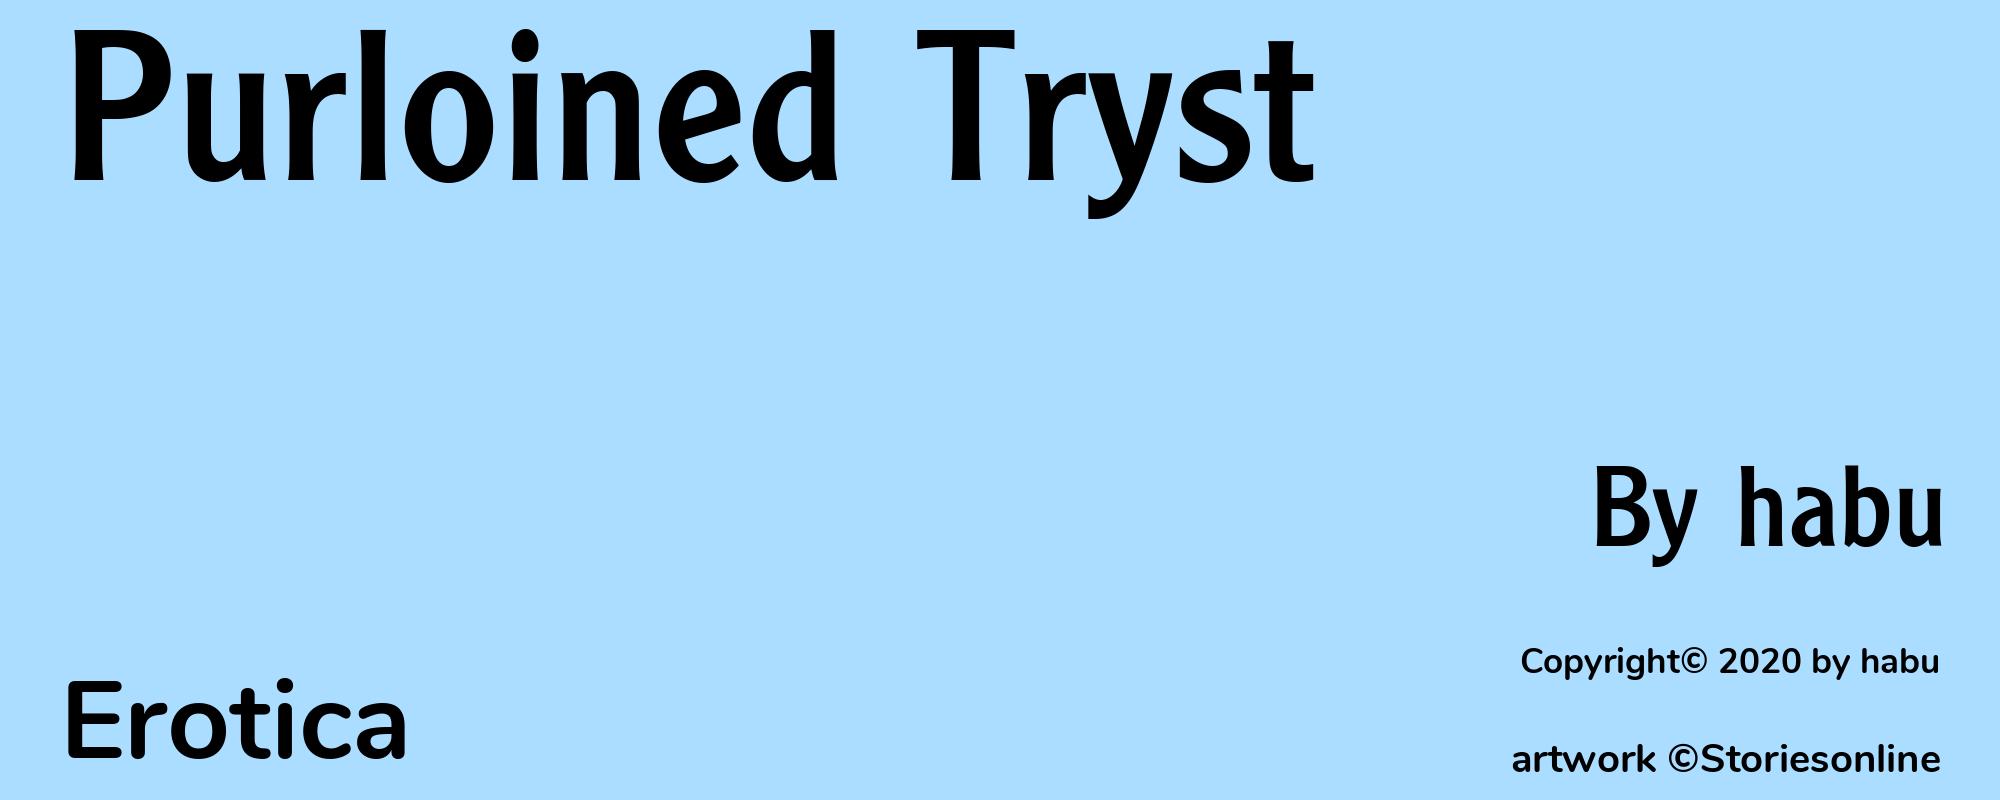 Purloined Tryst - Cover